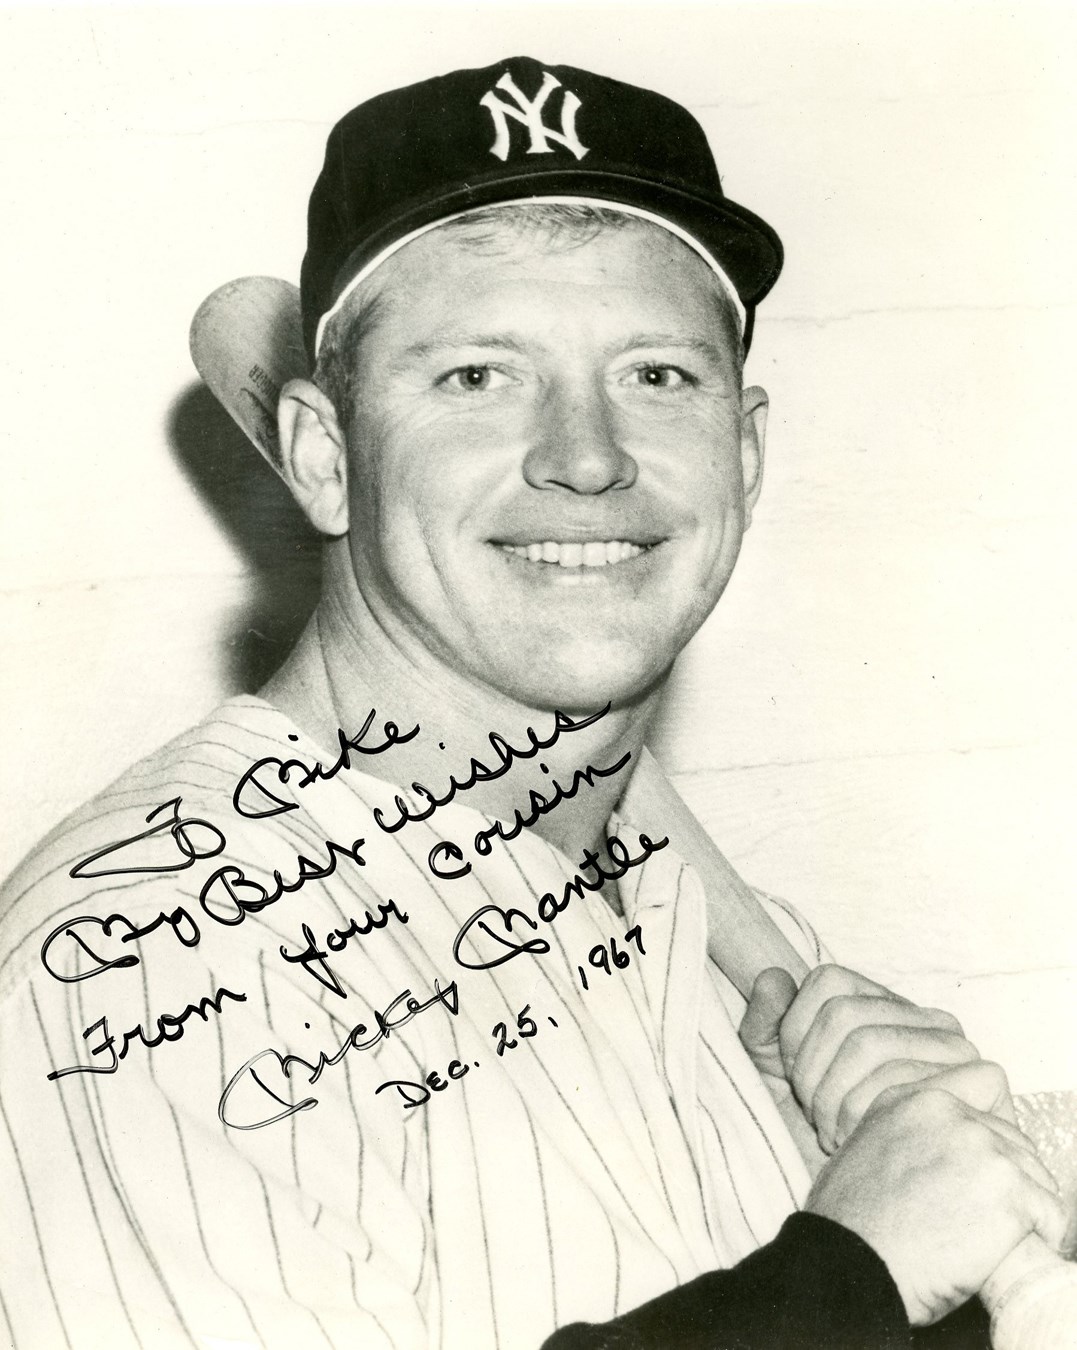 Mickey Mantle Signed "Christmas" Photo Inscribed to His Cousin - Gifted on Christmas Day (PSA/DNA)